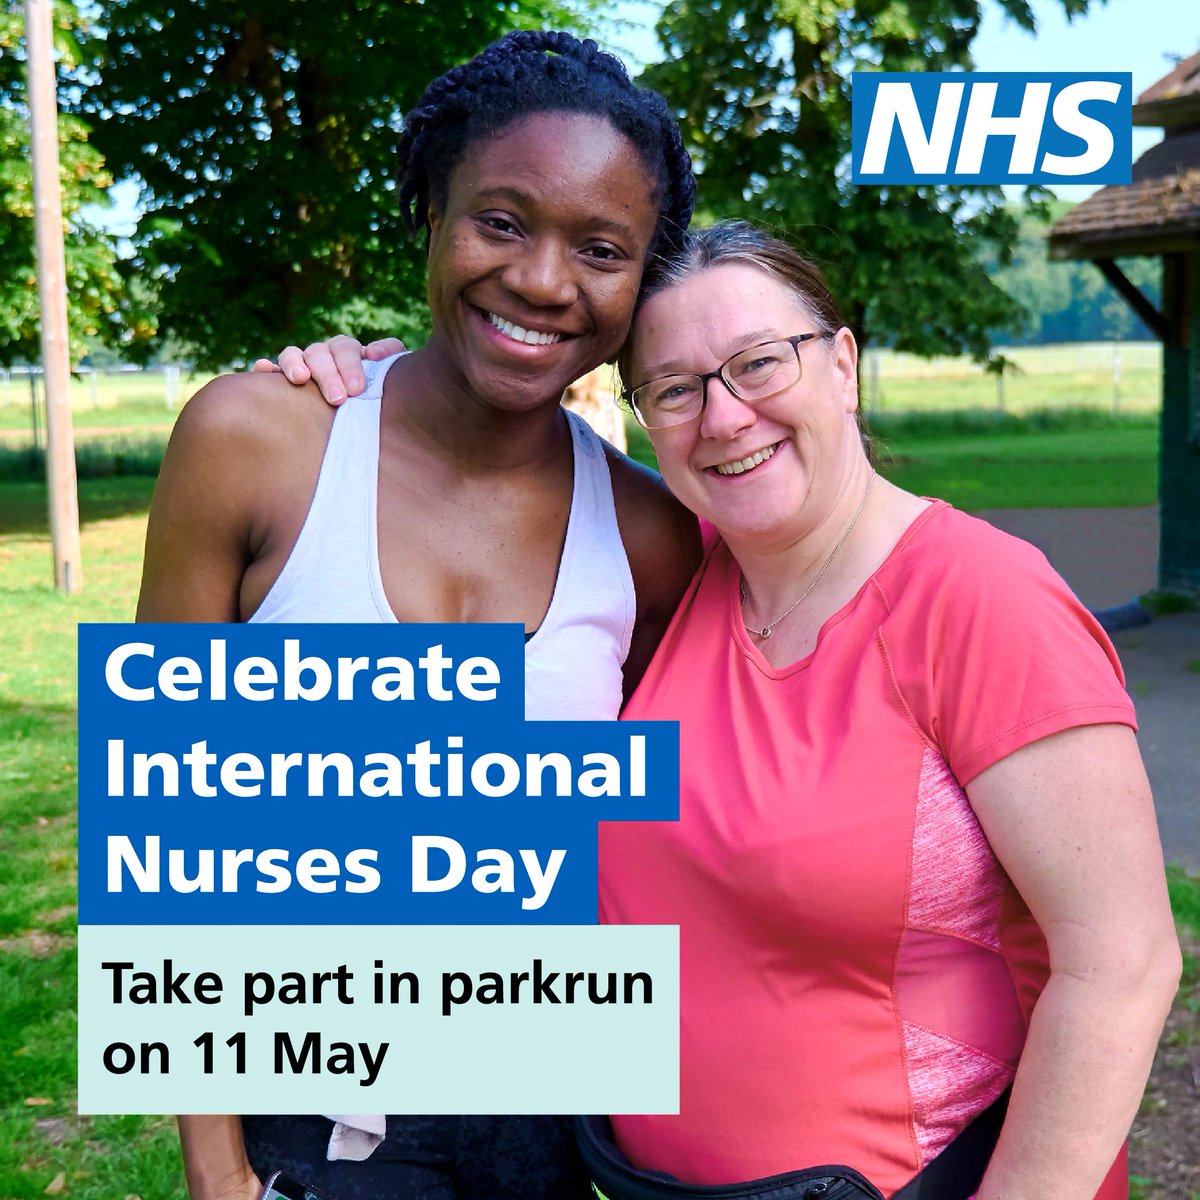 There's still time to sign up for this weekend's parkrun to celebrate International Nurses Day #IND2024 Register for your local parkrun and take part on 11 May ➡️ parkrun.org.uk/register/